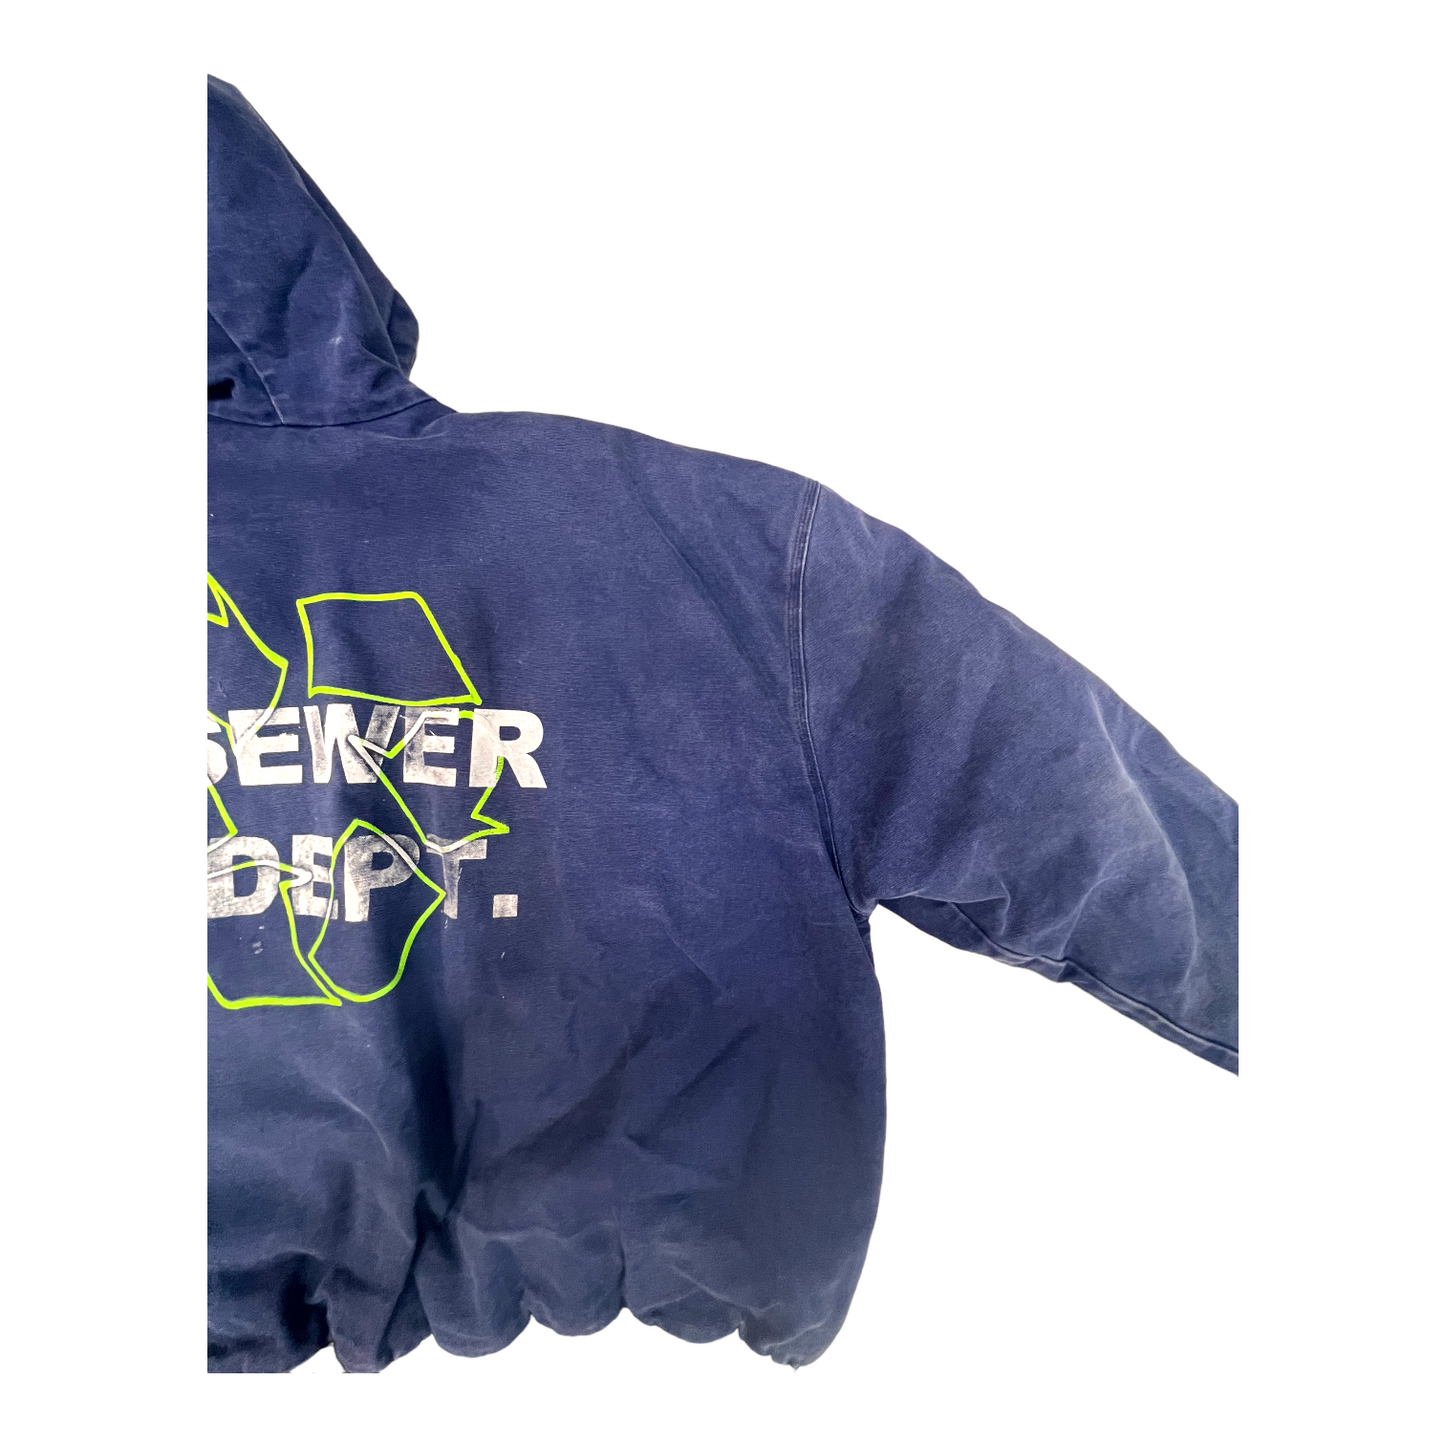 Sewer Dept recycle Utility bomber jacket